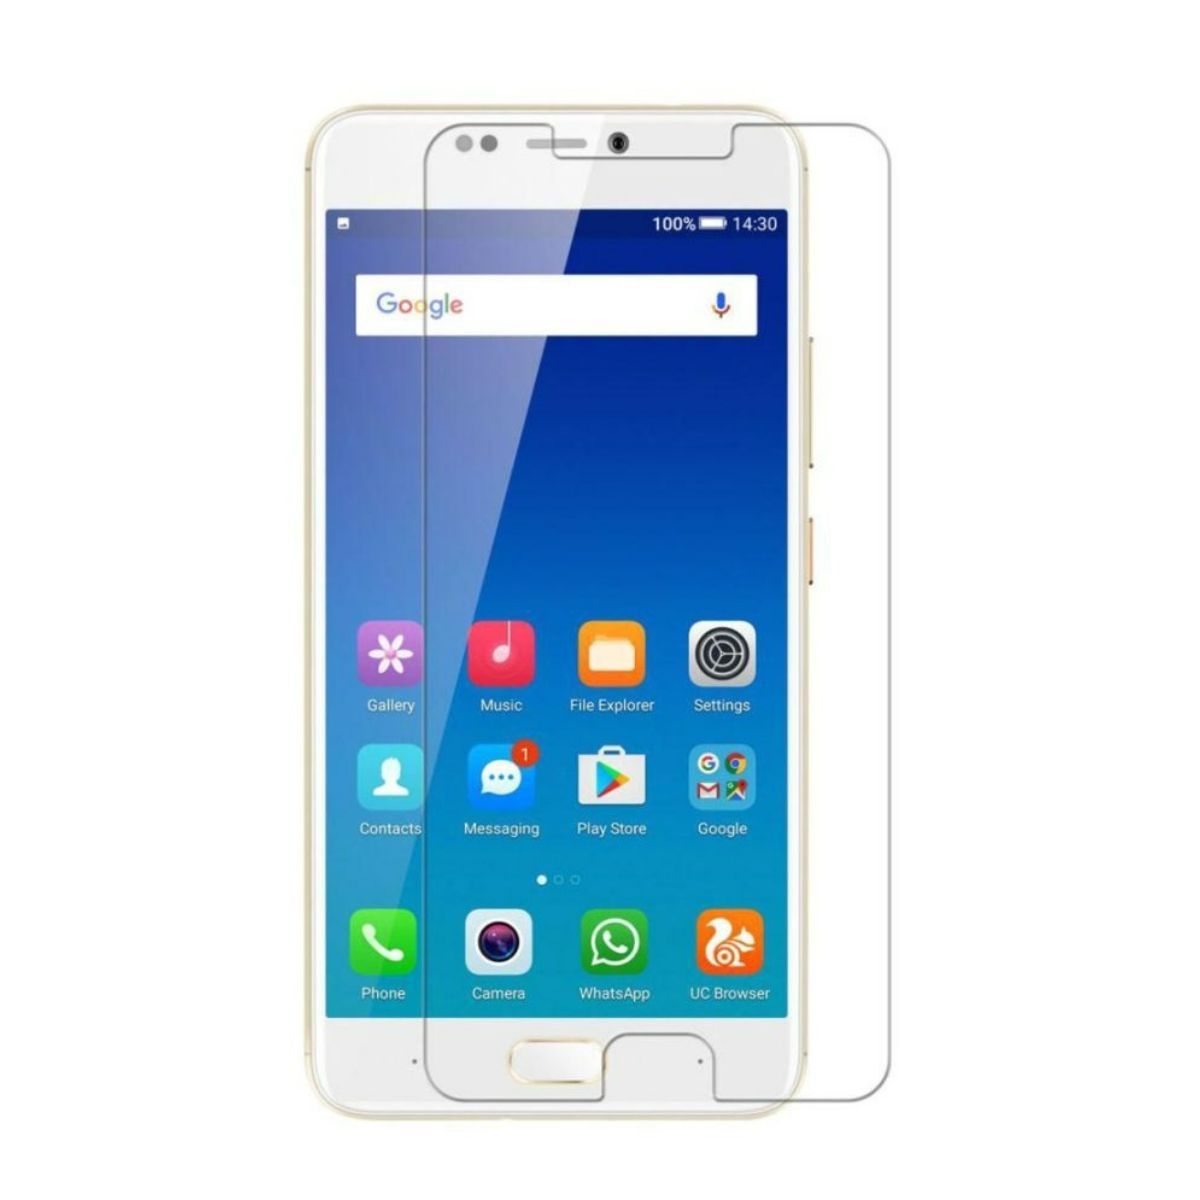 GIONEE A1 PLUS